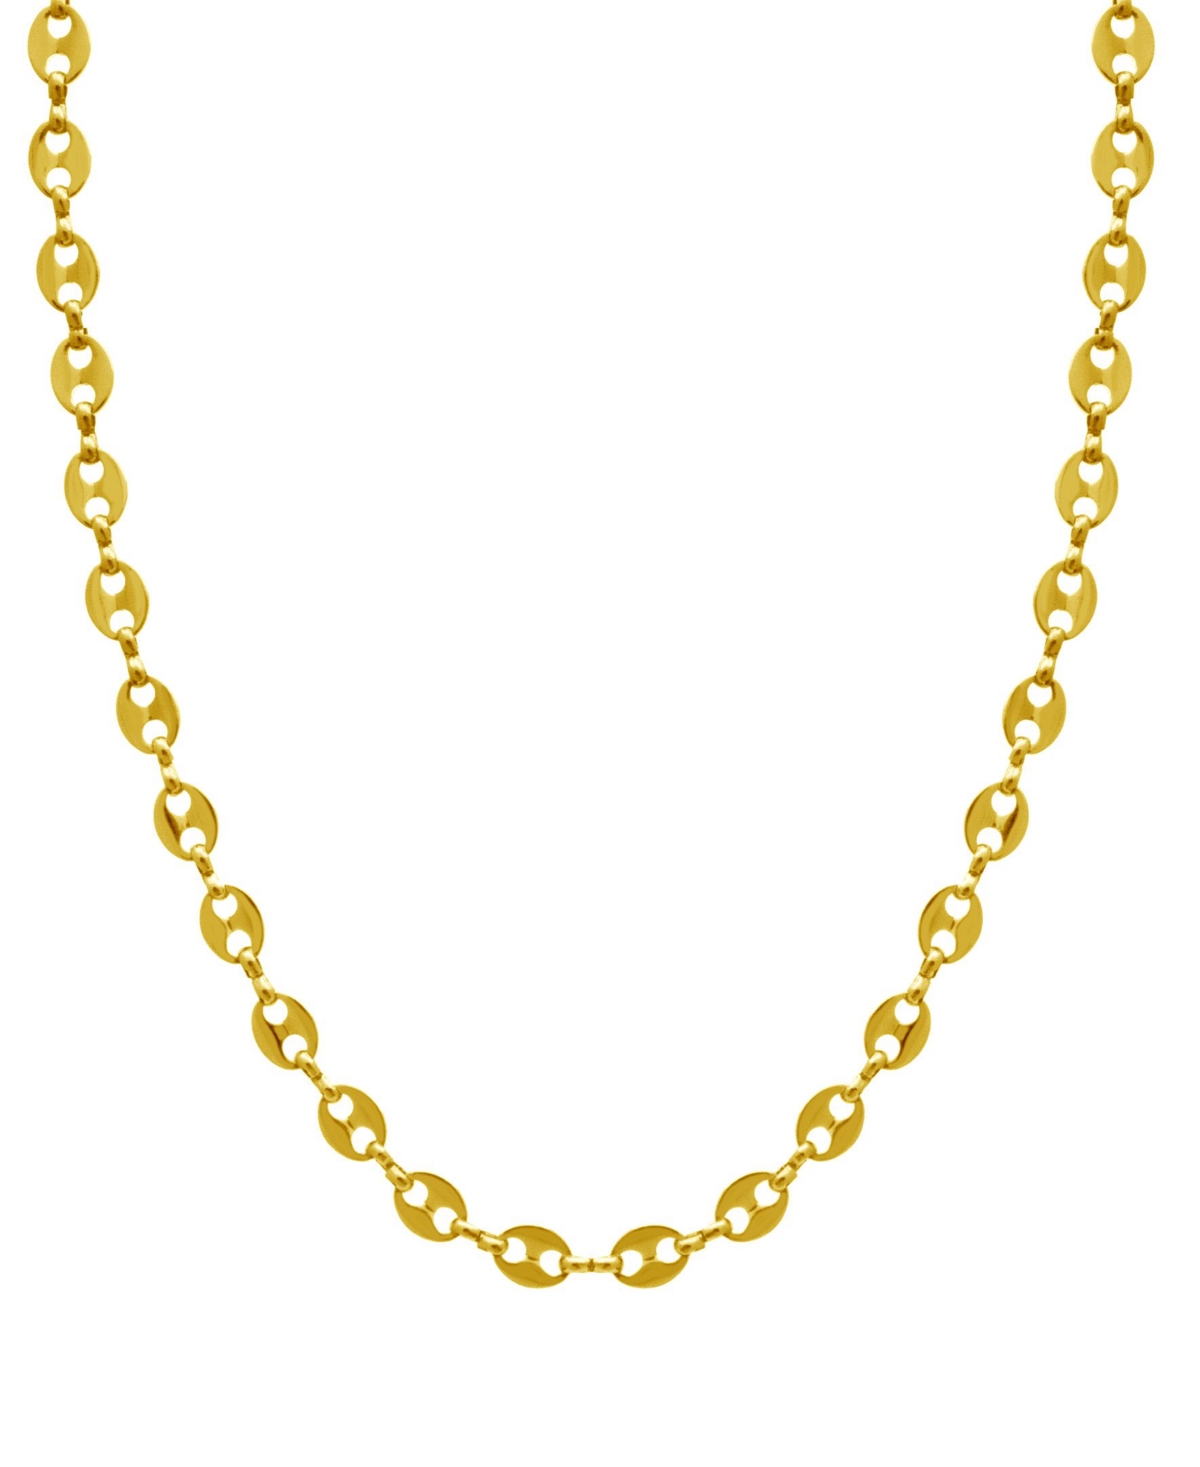 Gold Plated Marine Chain Necklace 16" + 2" Extender - Gold-Plated